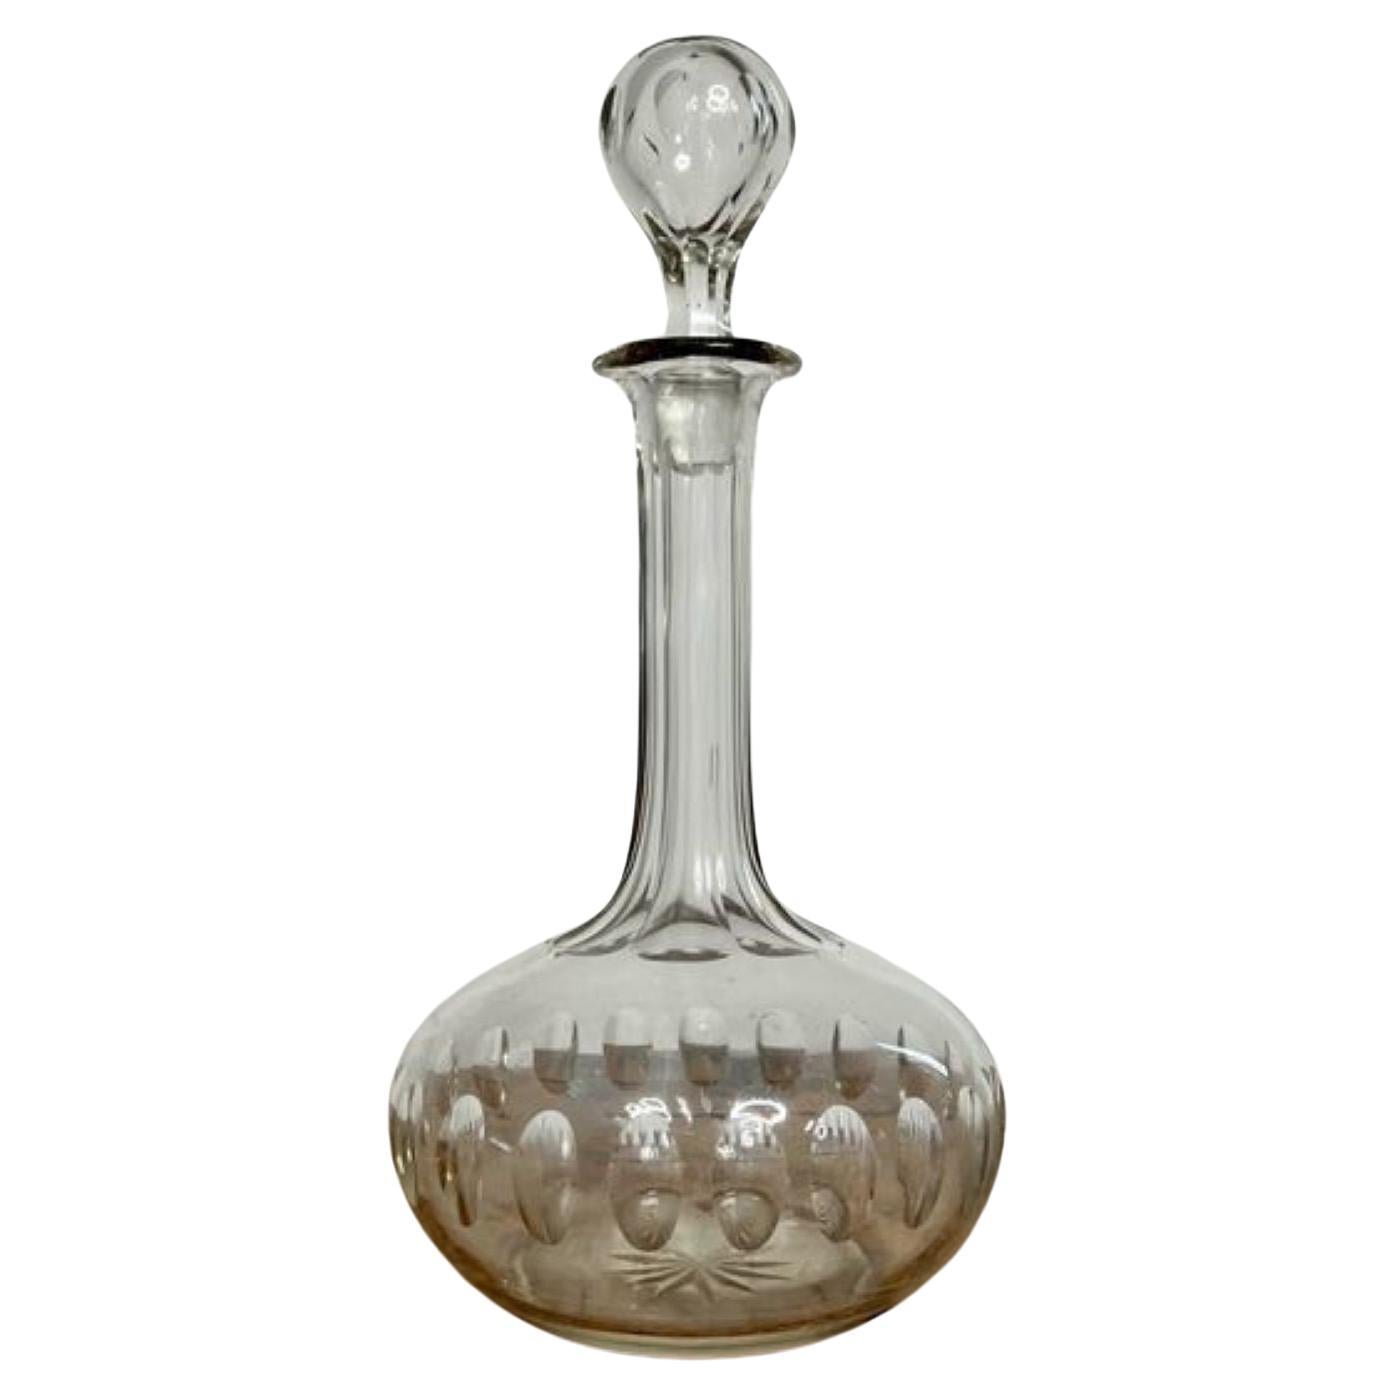 Stunning quality antique Victorian decanter 